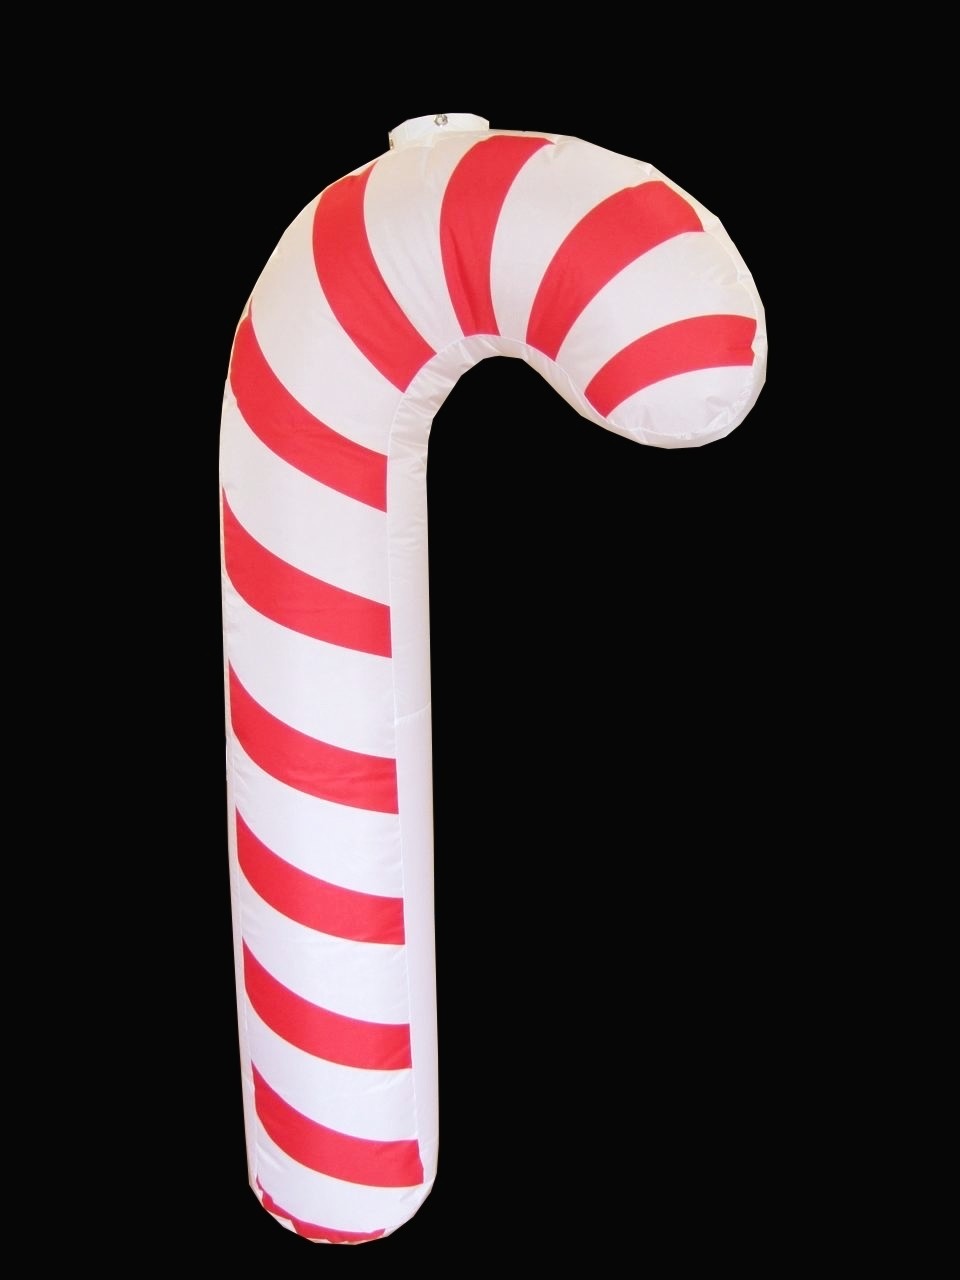 Hanging Inflatable Candy Cane 3ft/91cm x 6.2ft/188cm, Choose Colour: Red (Both Sides), Choose Style: Standard (white edges)